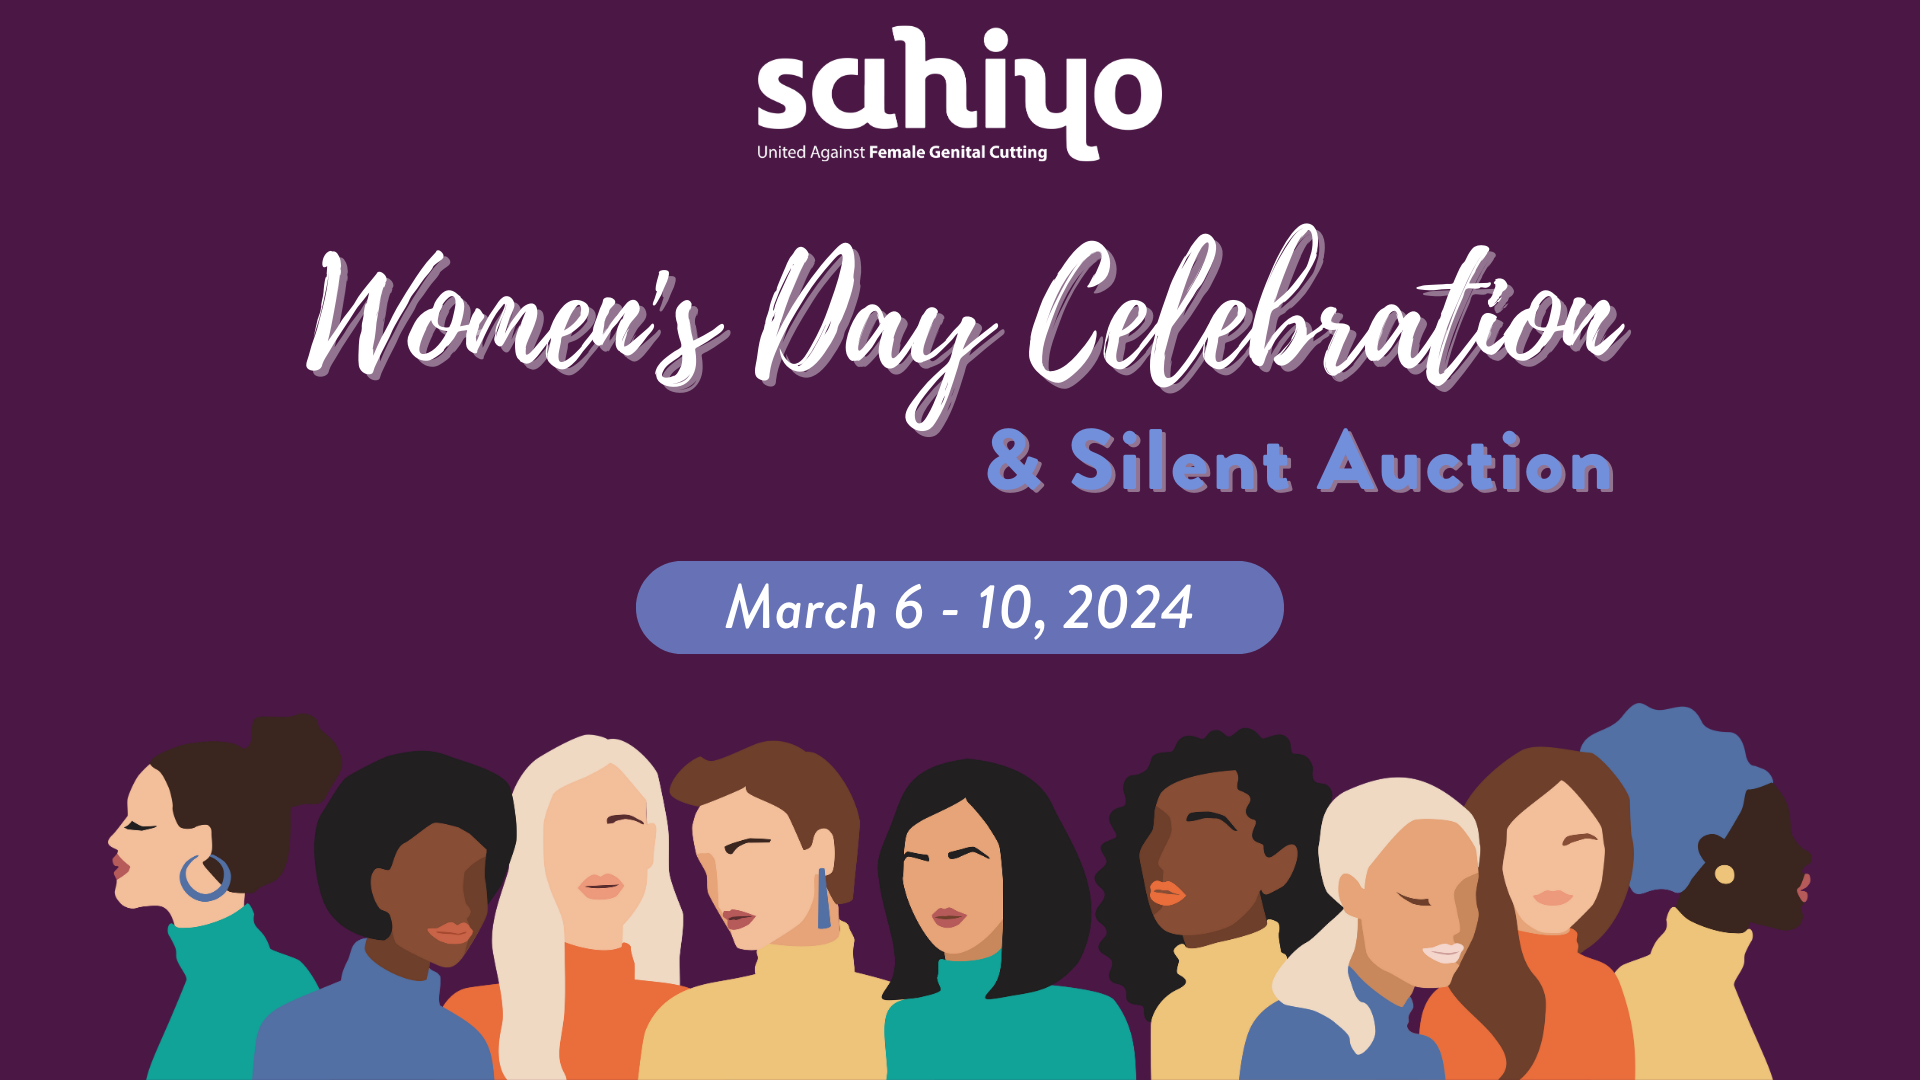 Sahiyo’s Second Annual Women’s Day Celebration and Silent Auction